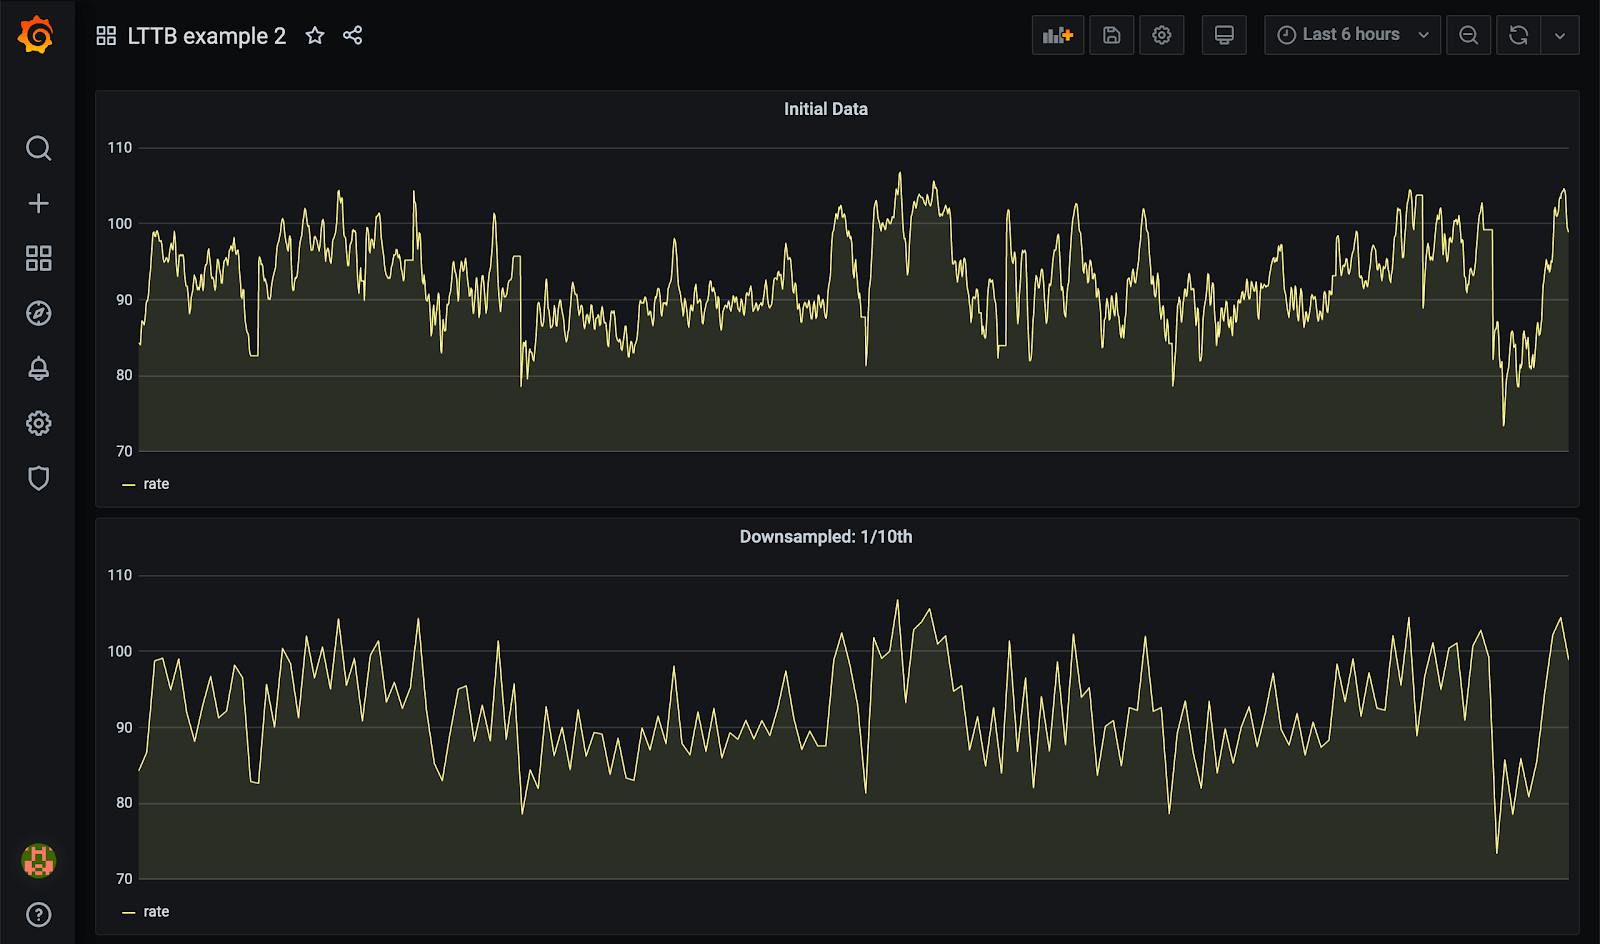 Grafana dashboard UI, showing initial and downsampled data